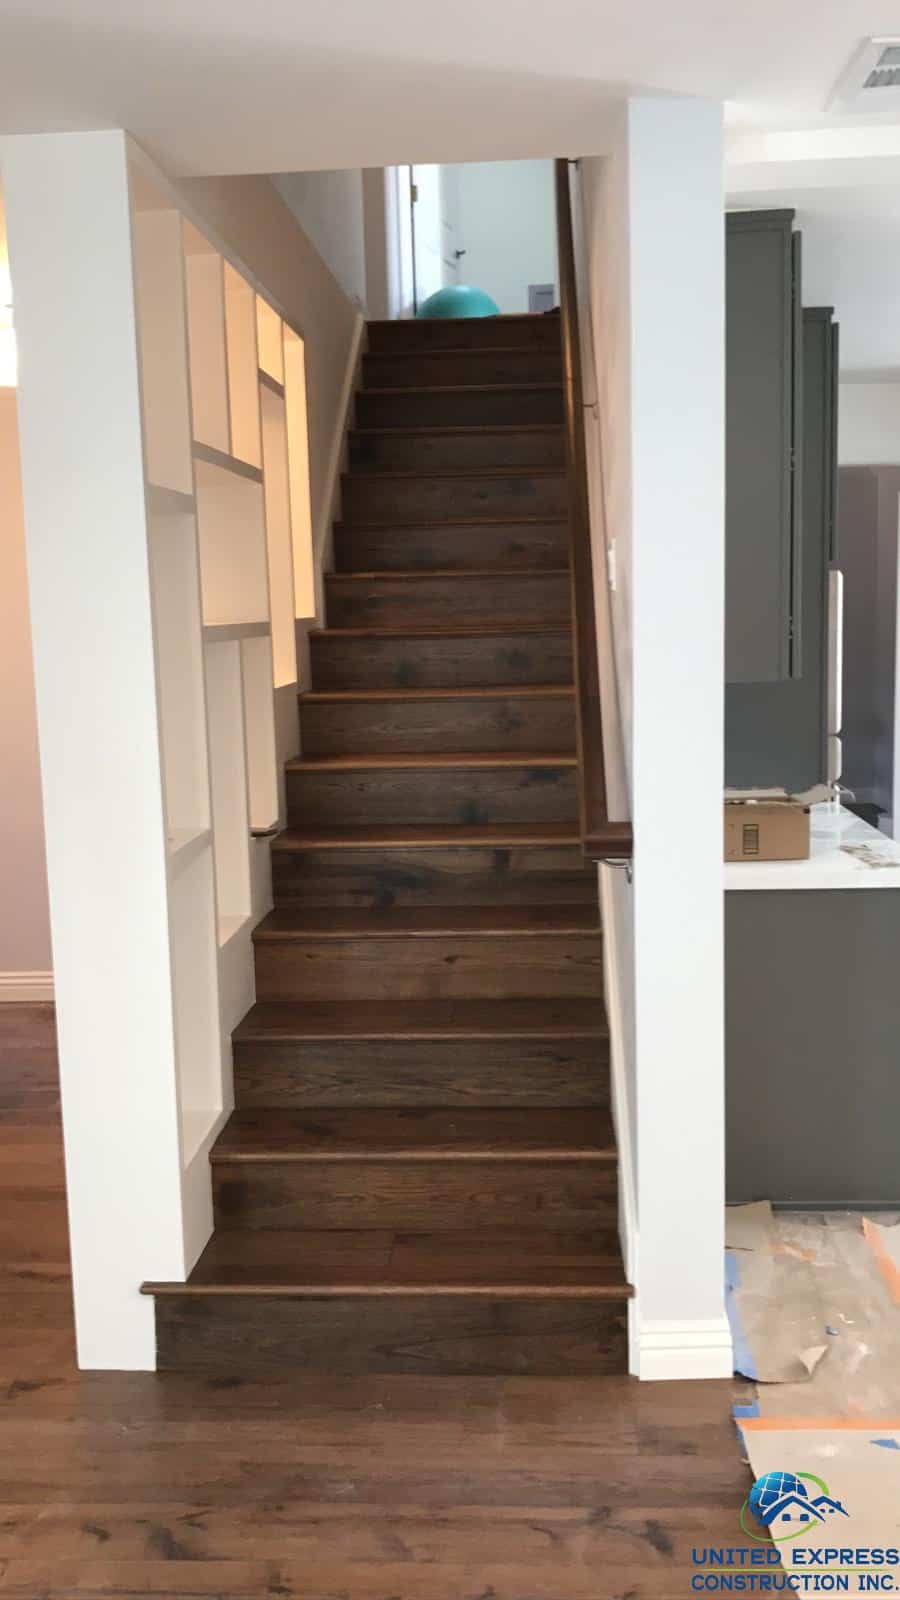 Installing wood flooring to stairs